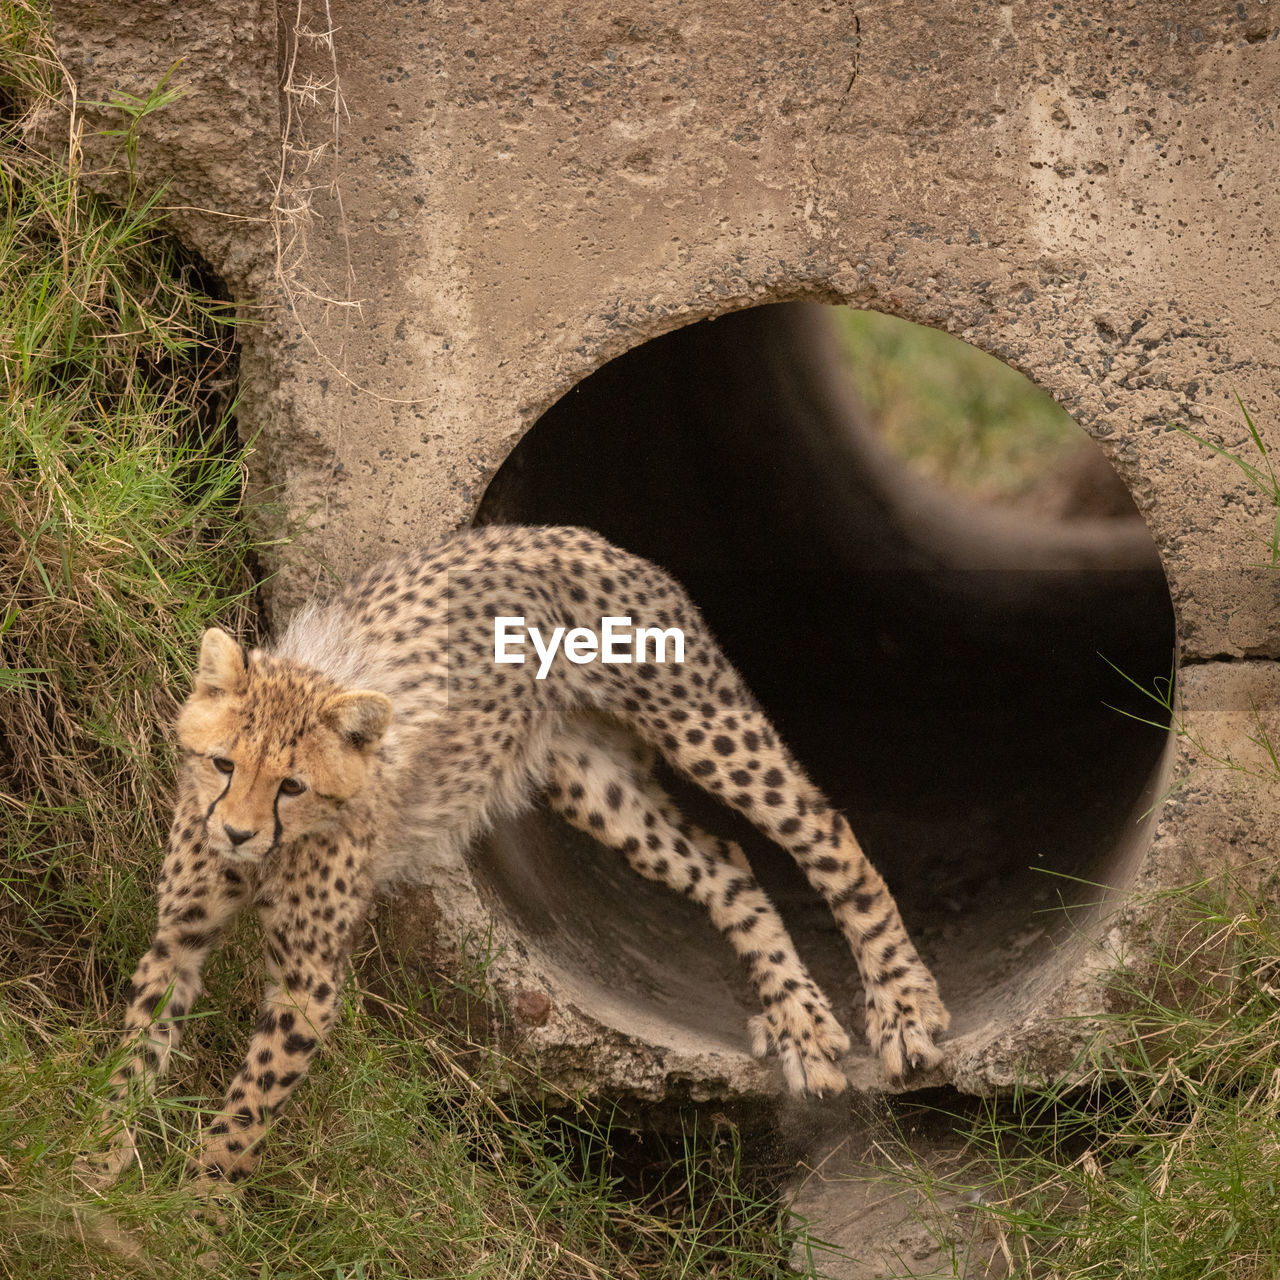 Cheetah jumping from pipe